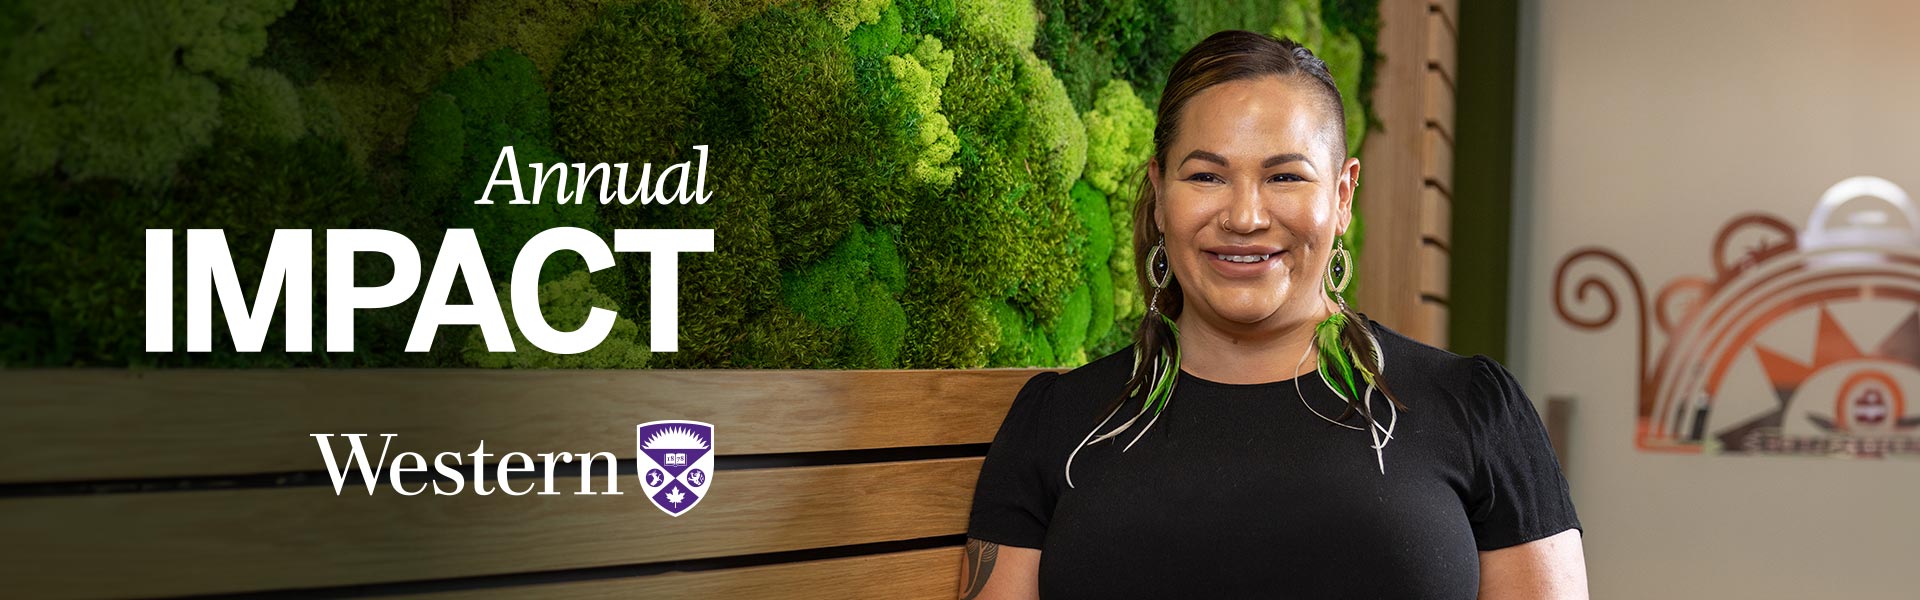 Vanessa Ambtman-Smith smiles in front of a green living wall, text reads 